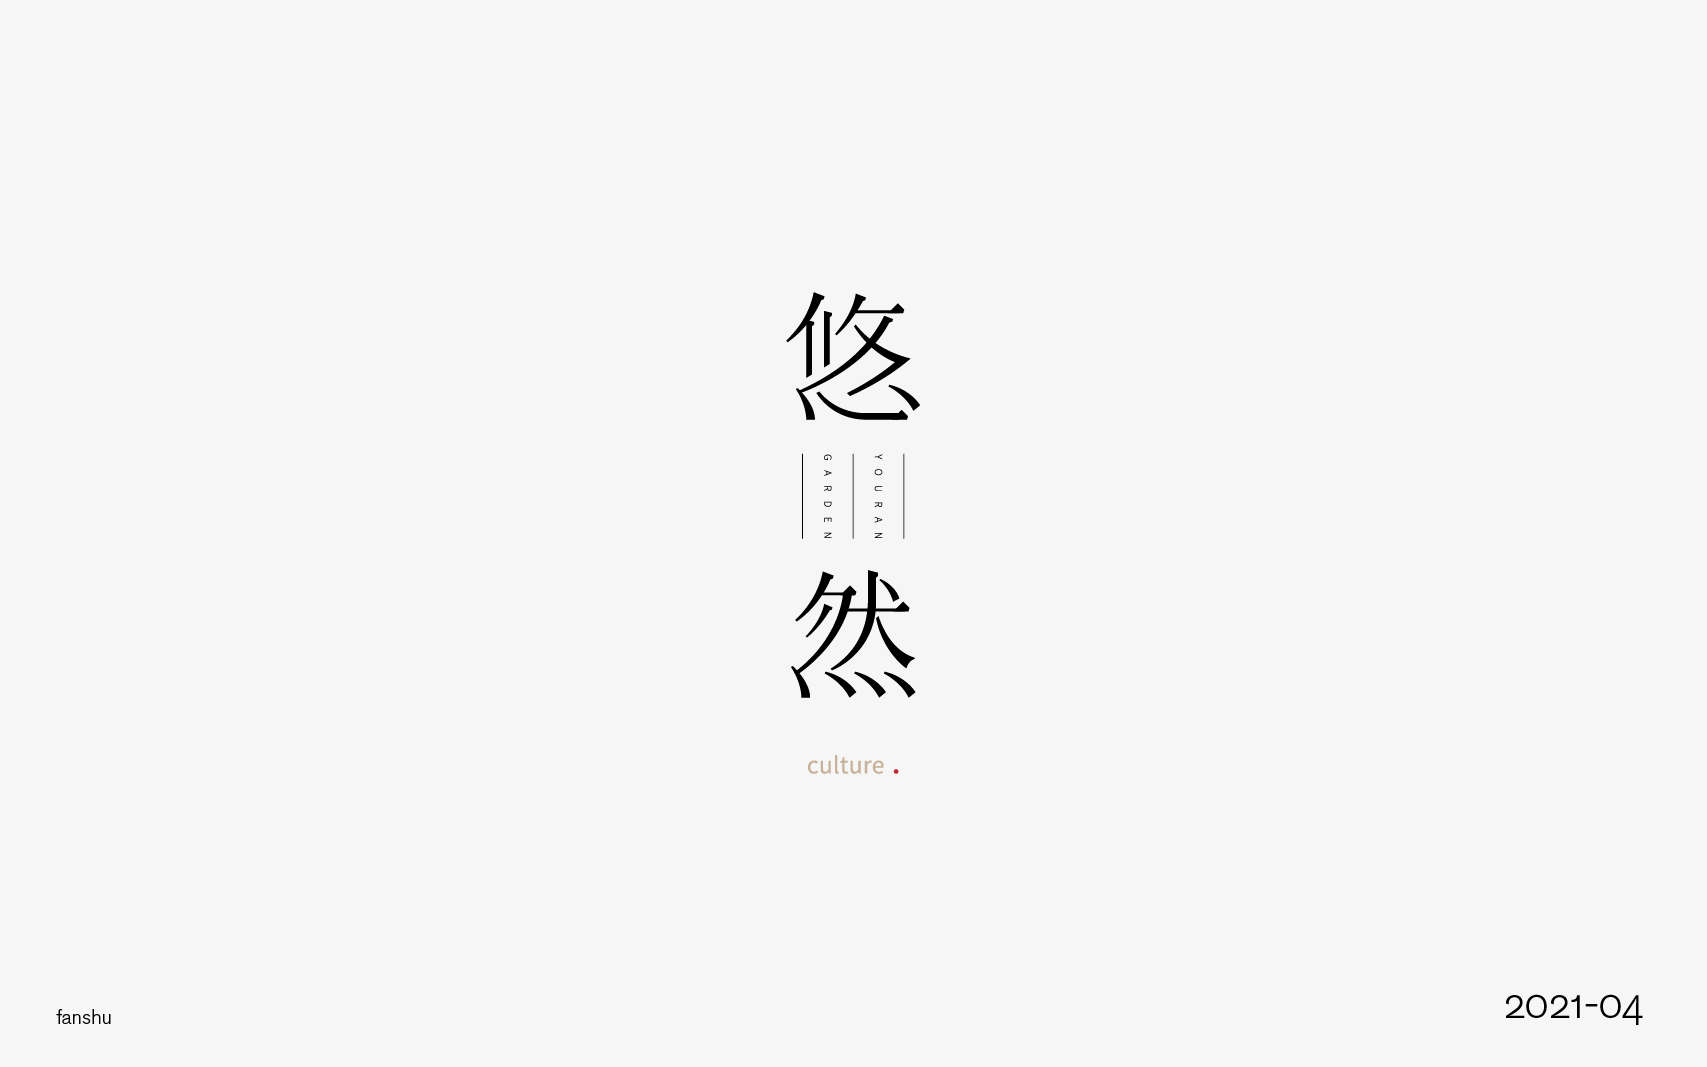 19P Collection of the latest Chinese font design schemes in 2021 #.18